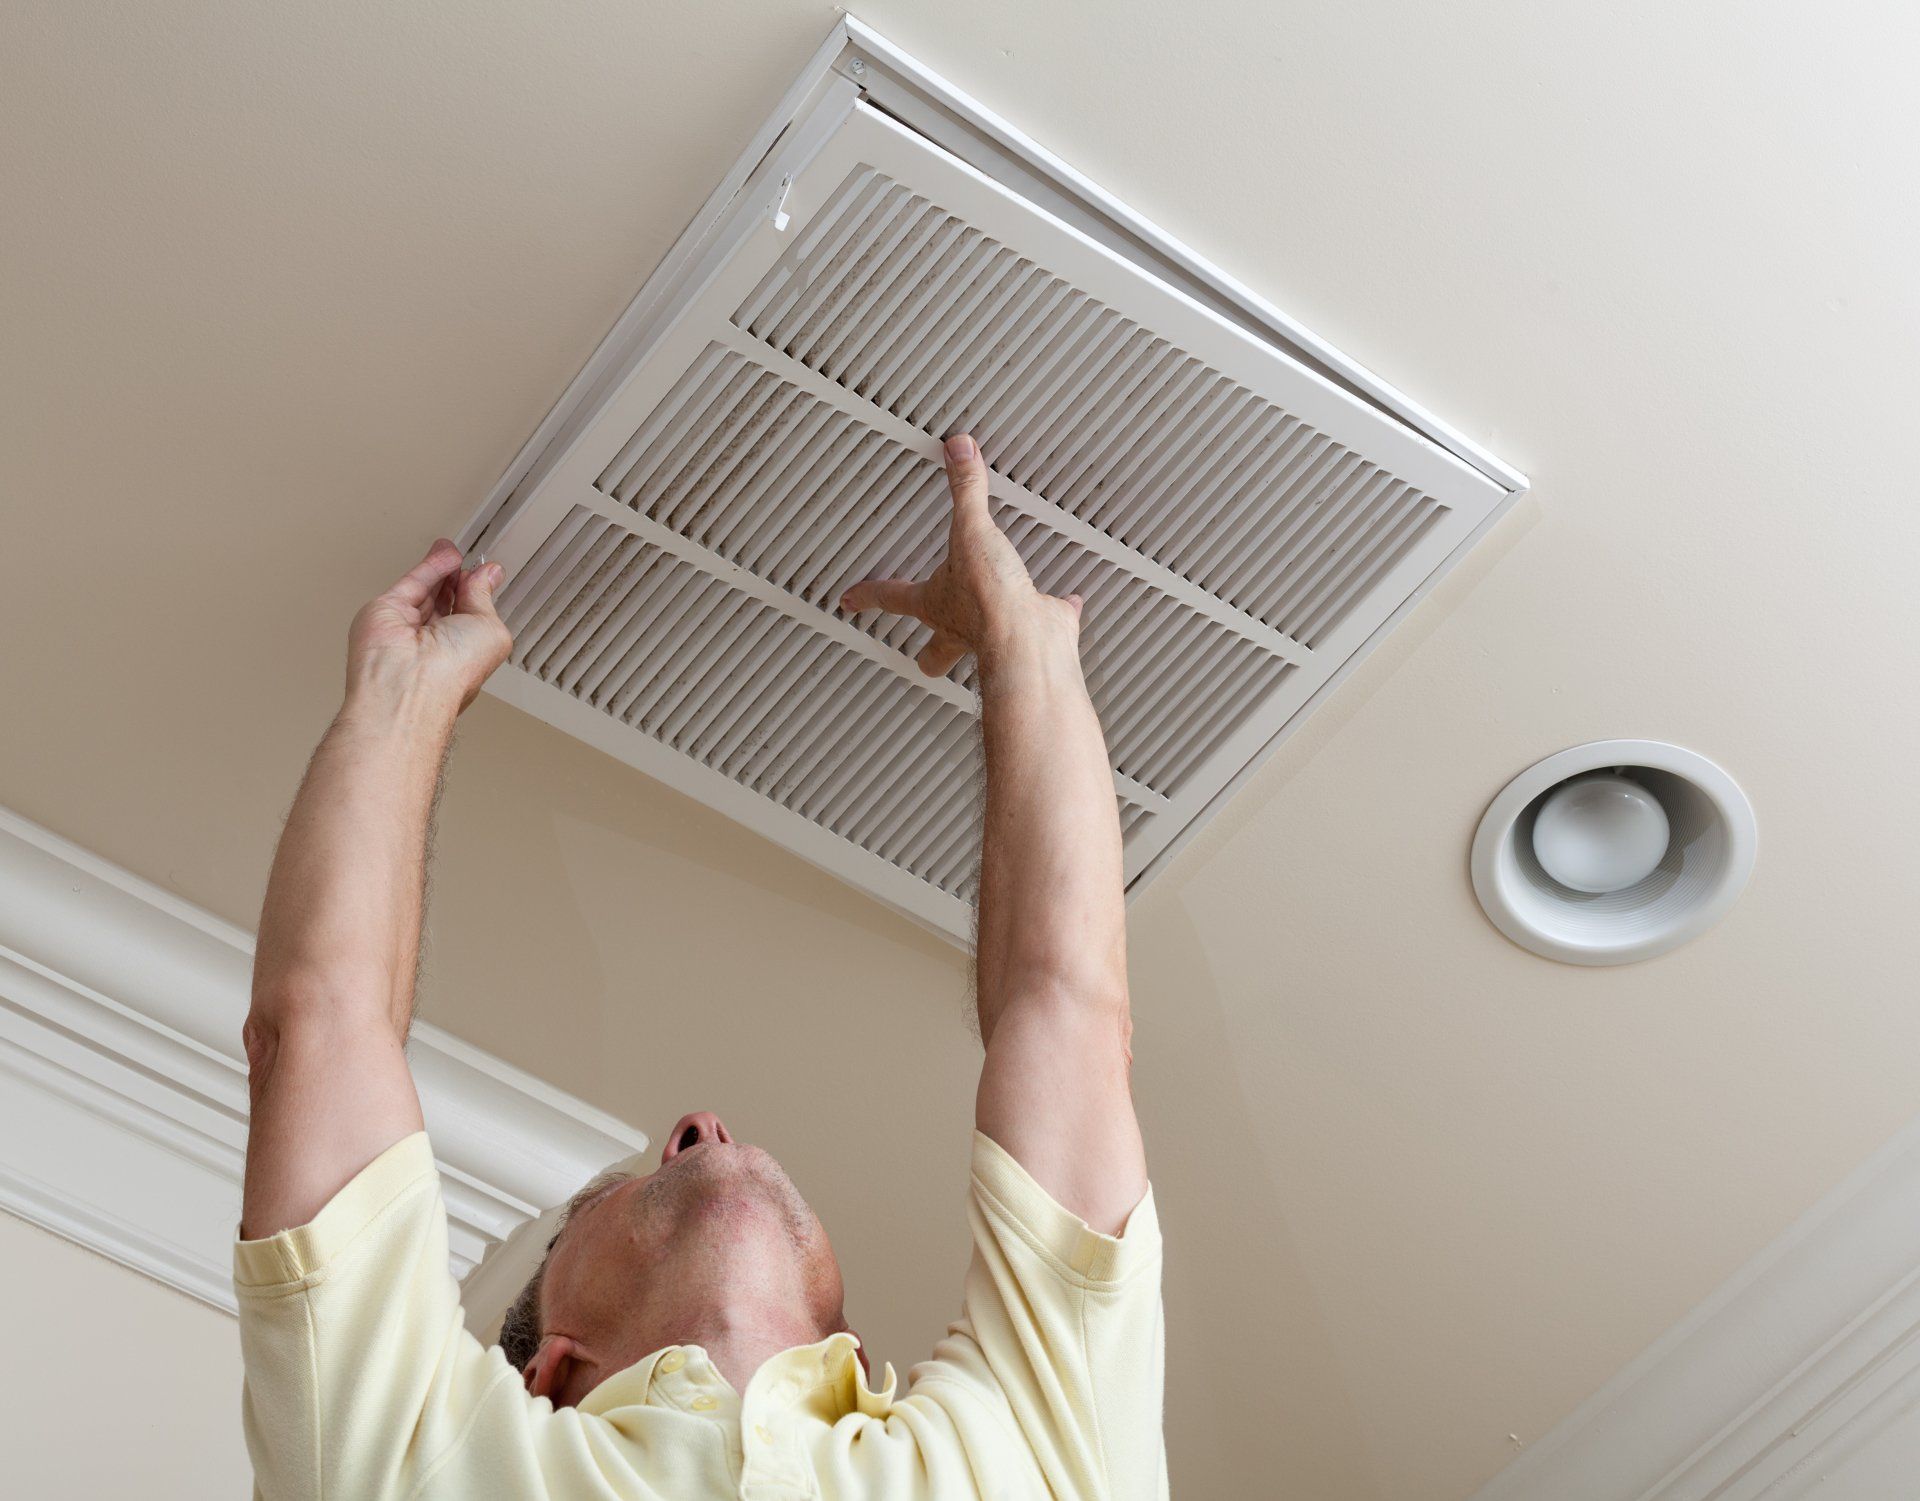 Home or Residential Ventilation and Air Quality Service